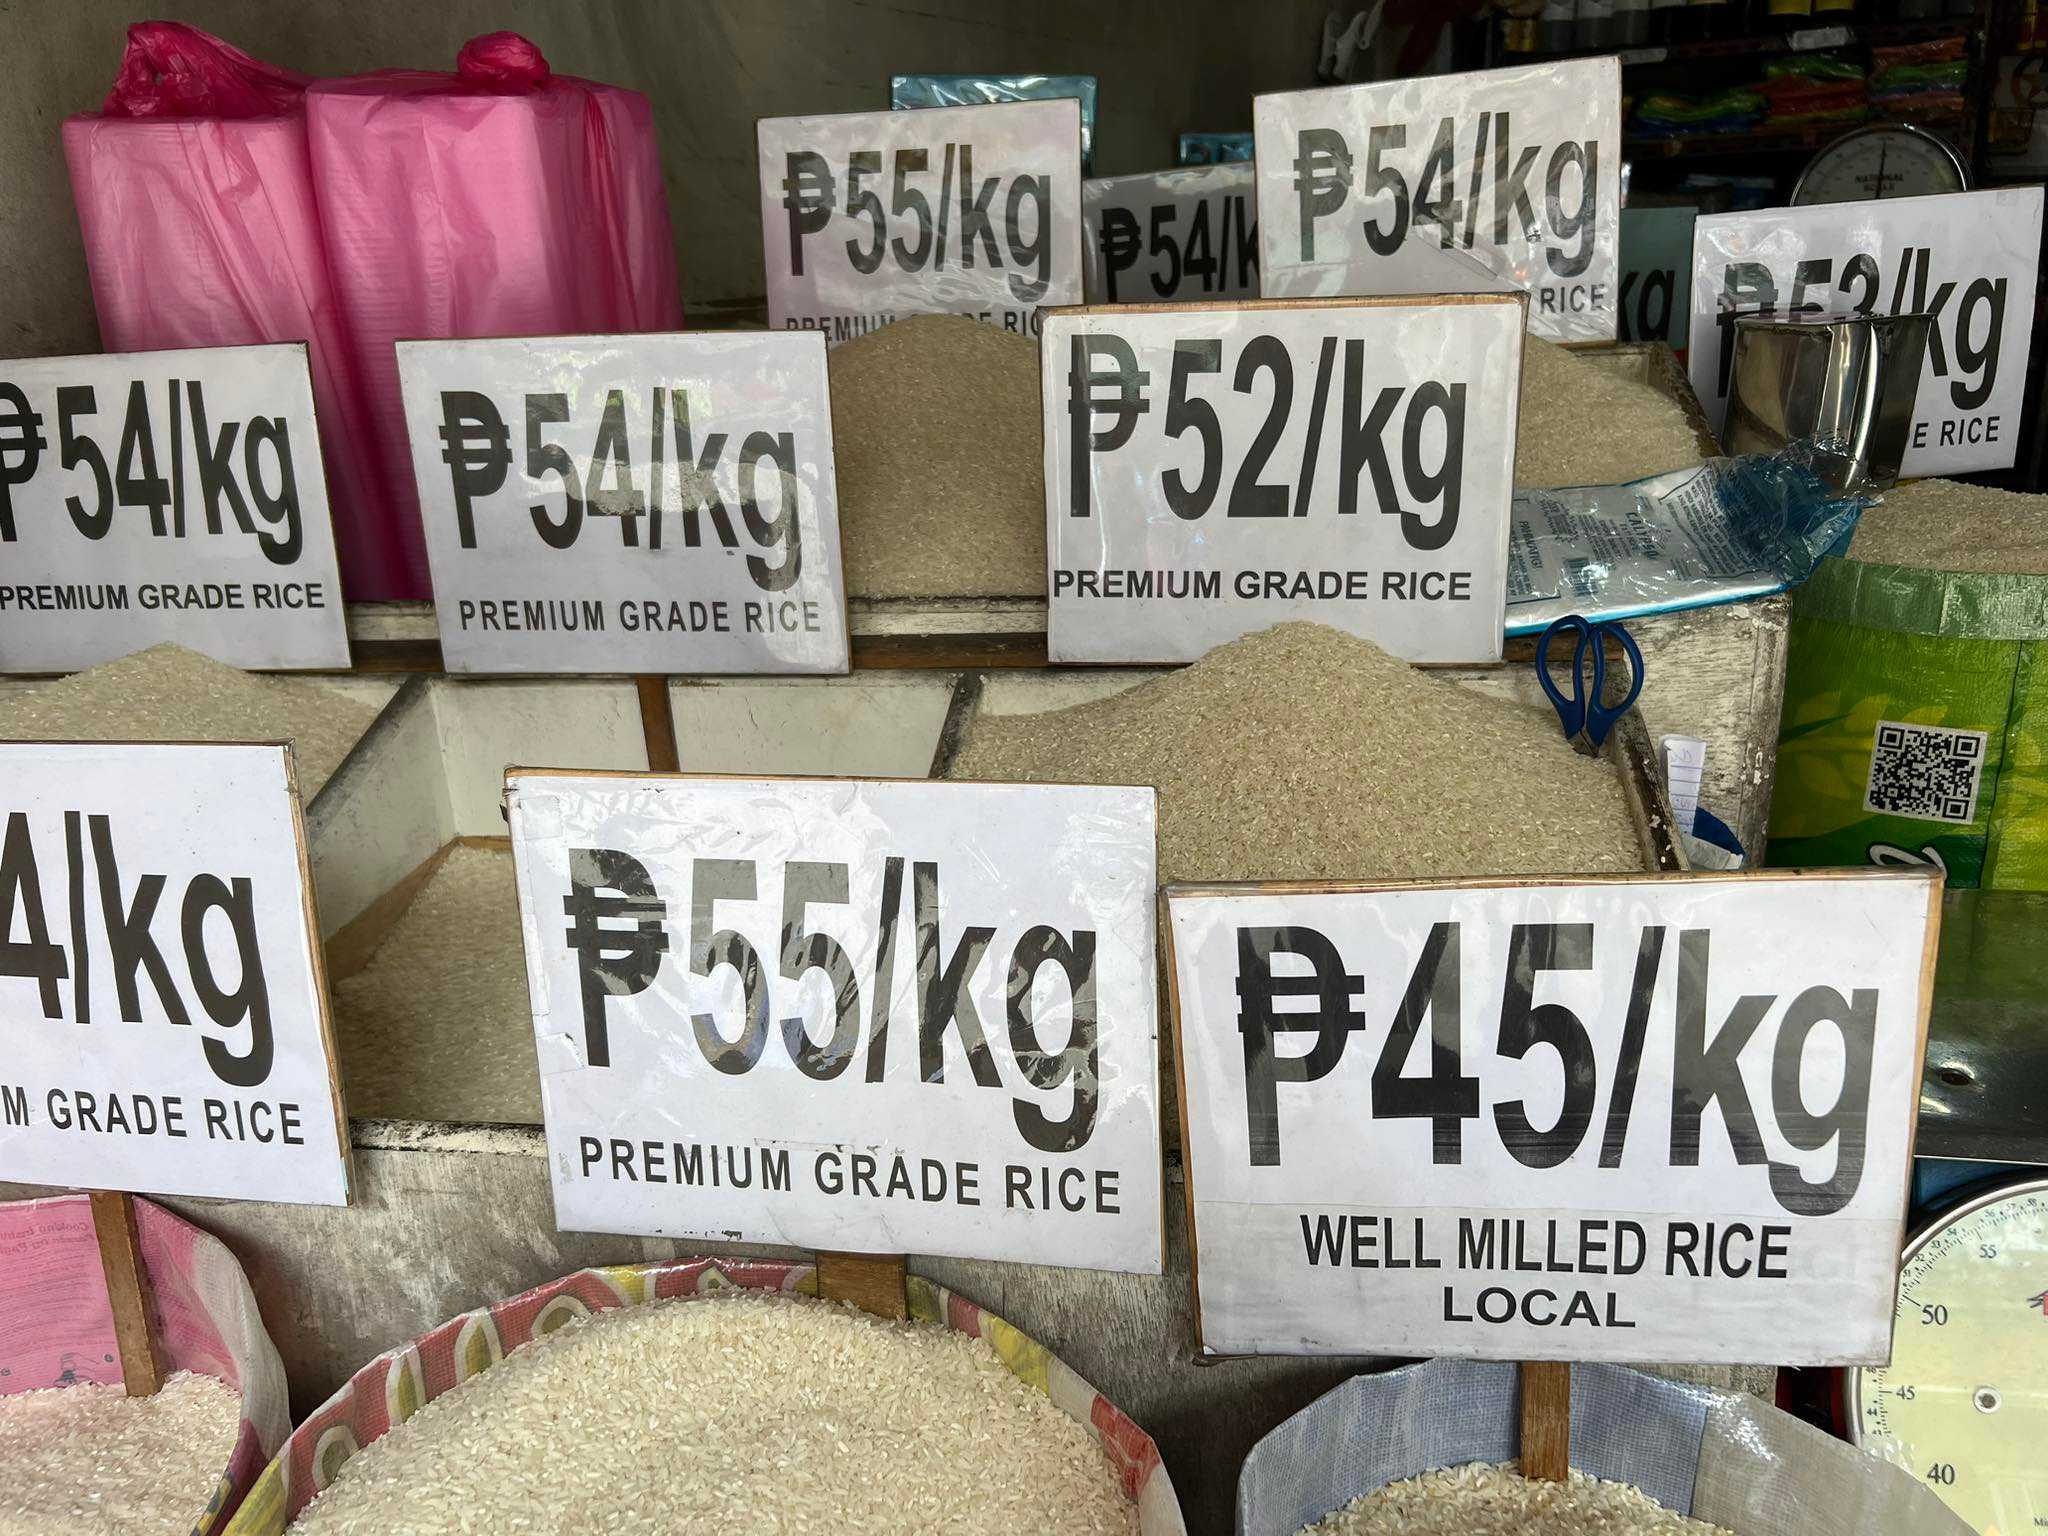 House to provide P2-M fund to assist rice retailers affected by price ceiling